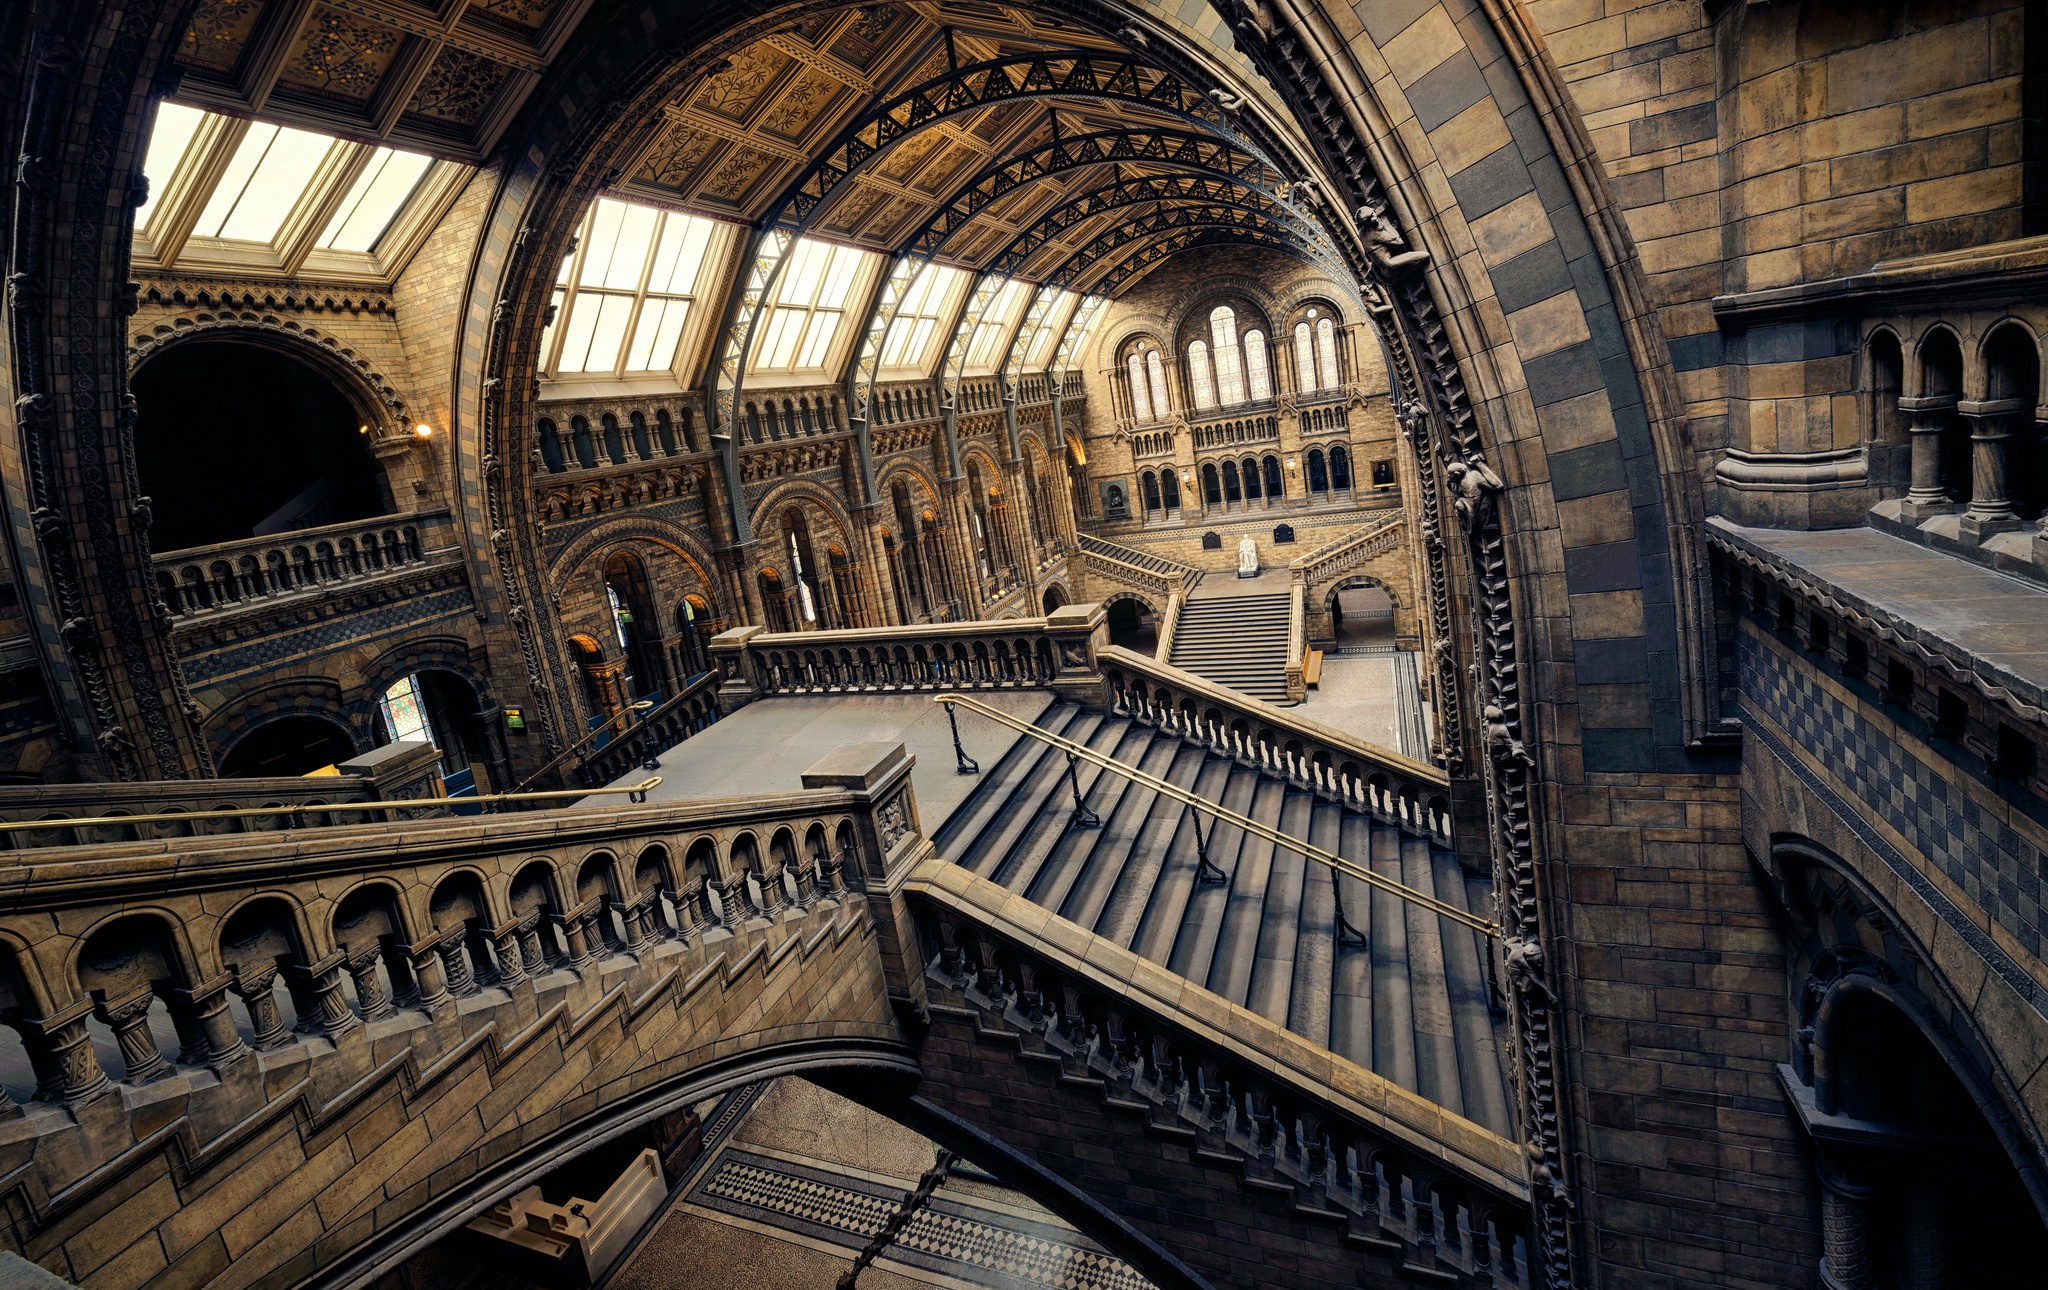 General 2048x1290 London museum building interior arch stairs